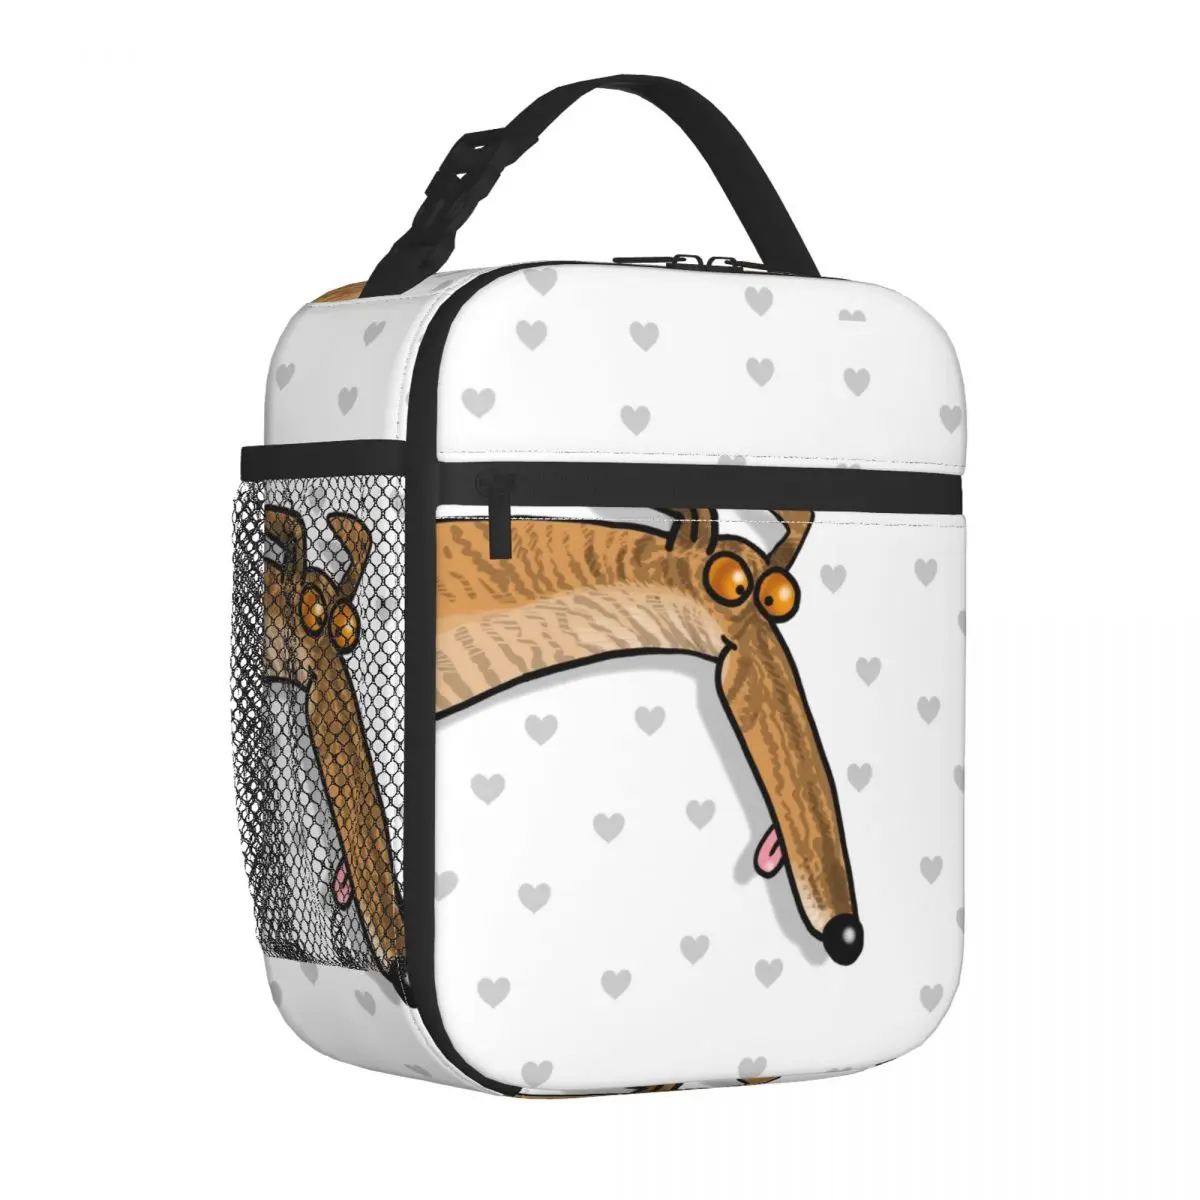 

Brindle Derp Insulated Lunch Bag Leakproof Greyhound Whippet Lurcher Dog Meal Container Cooler Bag Tote Lunch Box Bento Pouch